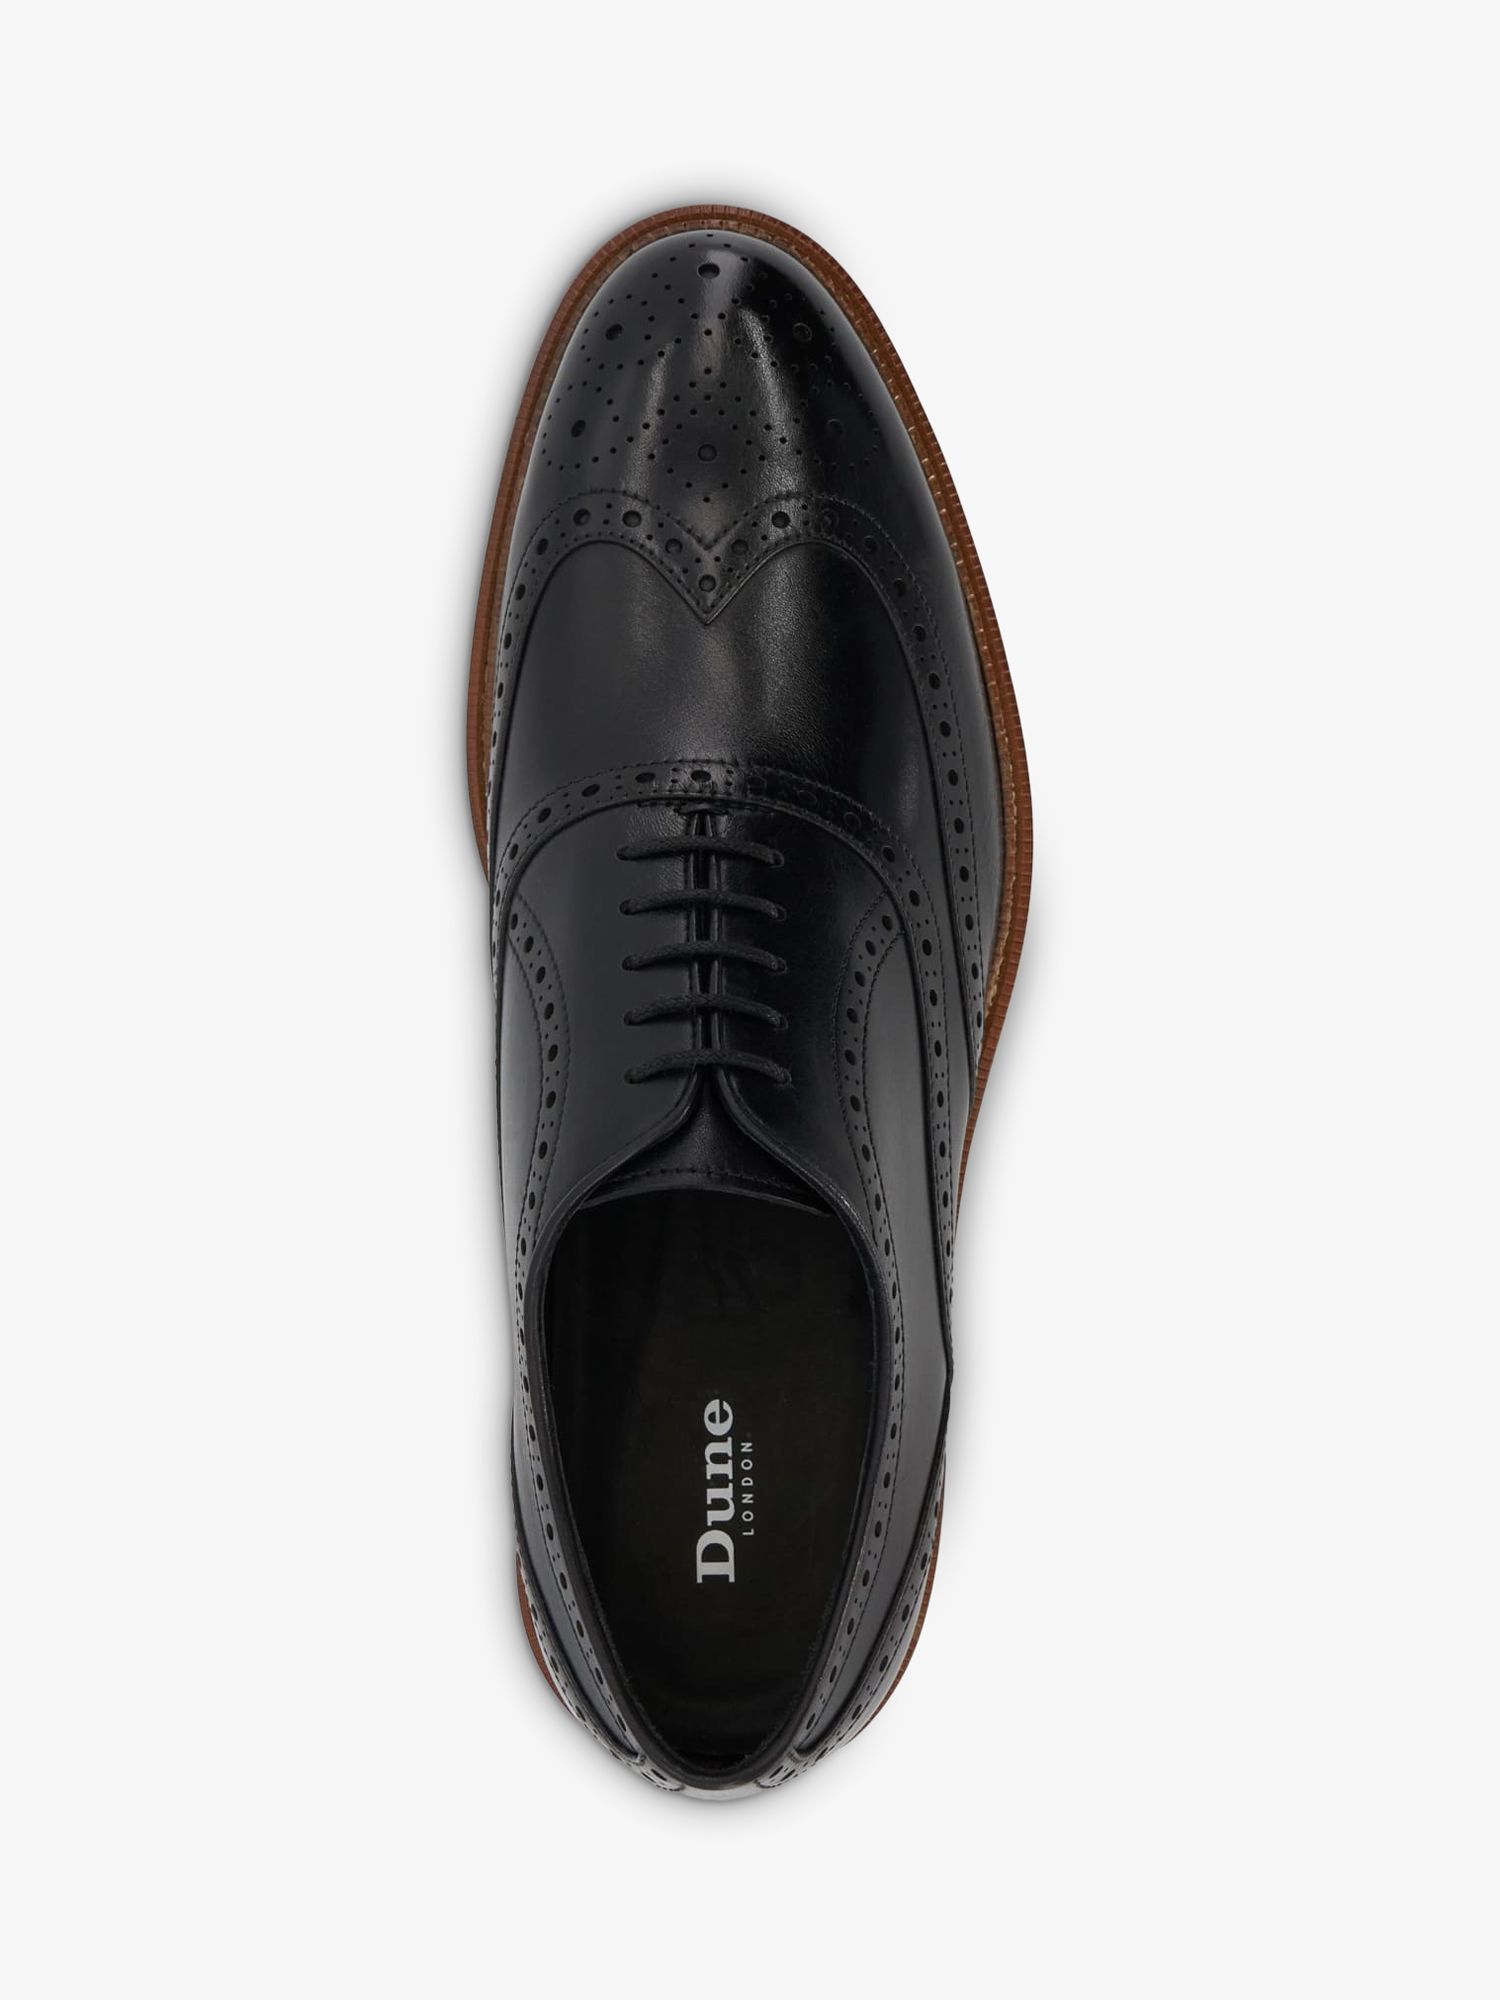 Dune Solihull Brogue Leather Oxford Shoes, Black, 7